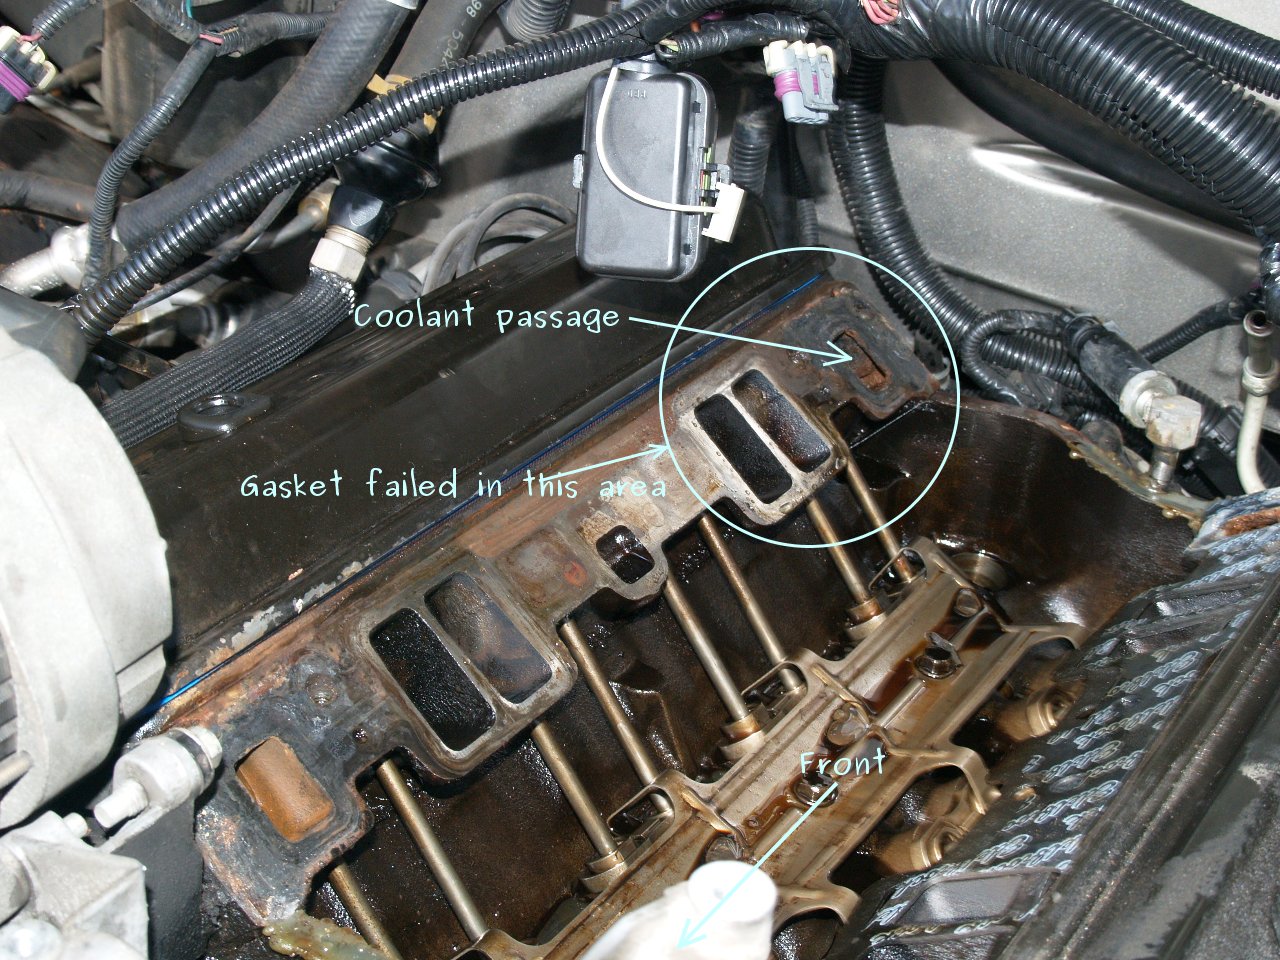 See P3028 in engine